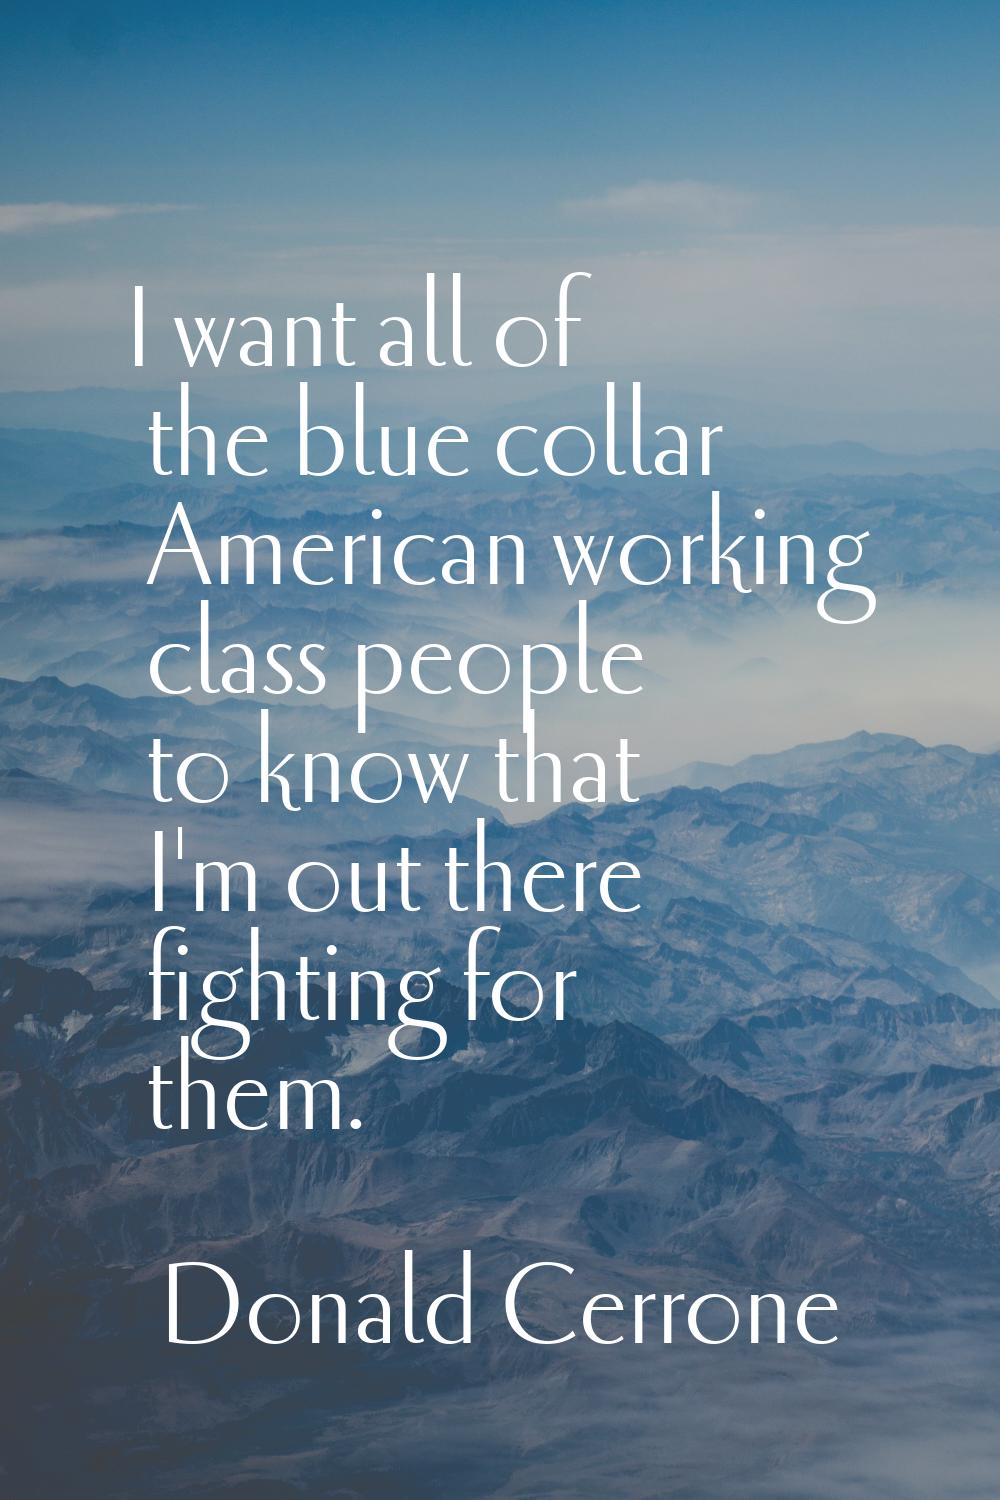 I want all of the blue collar American working class people to know that I'm out there fighting for